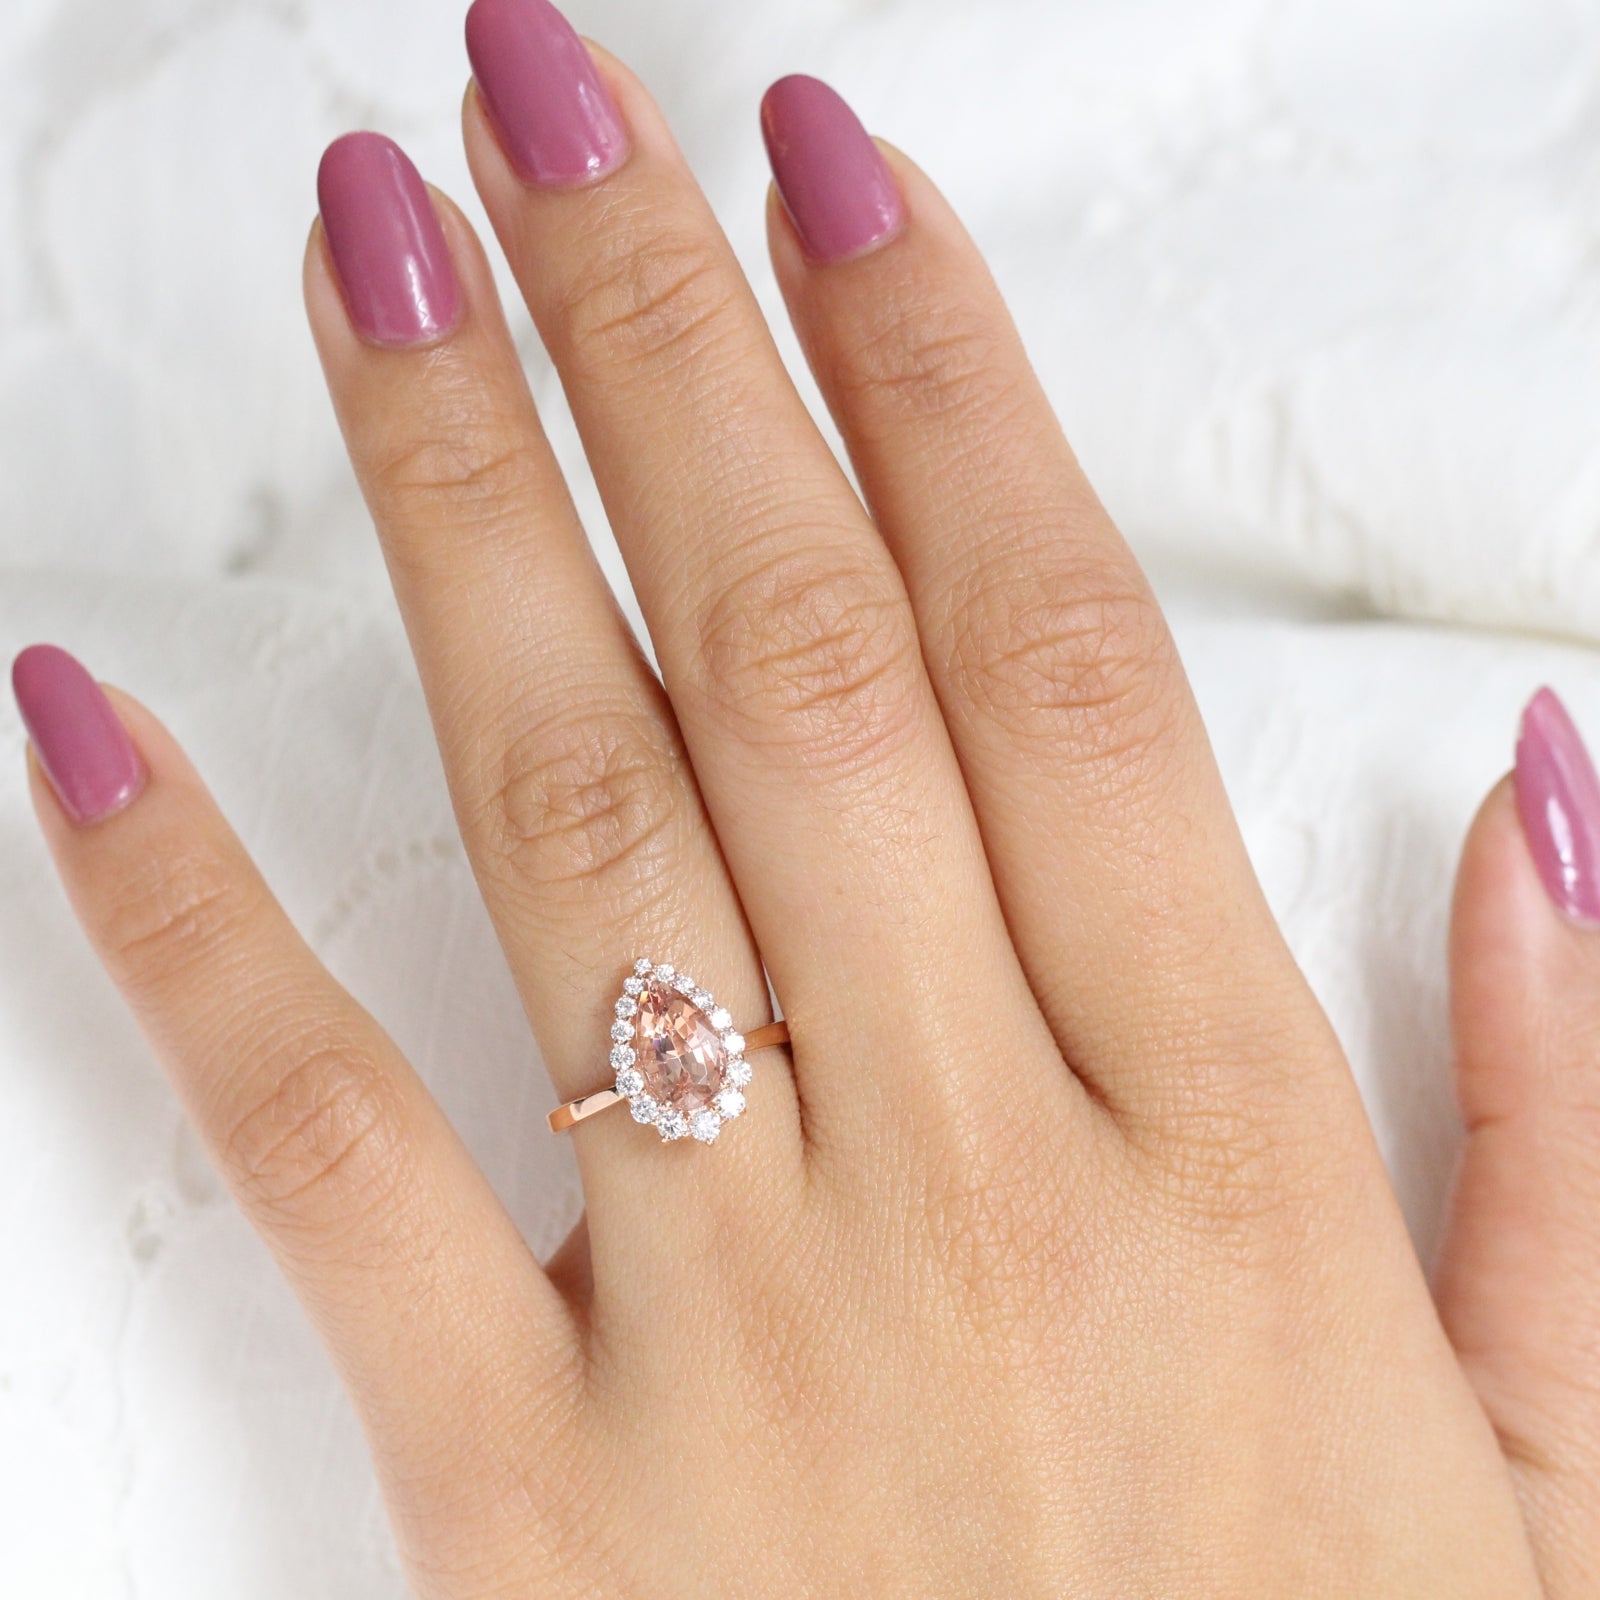 Peach Morganite Engagement Ring in Rose Gold Halo Diamond Pear Ring by La More Design Jewelry